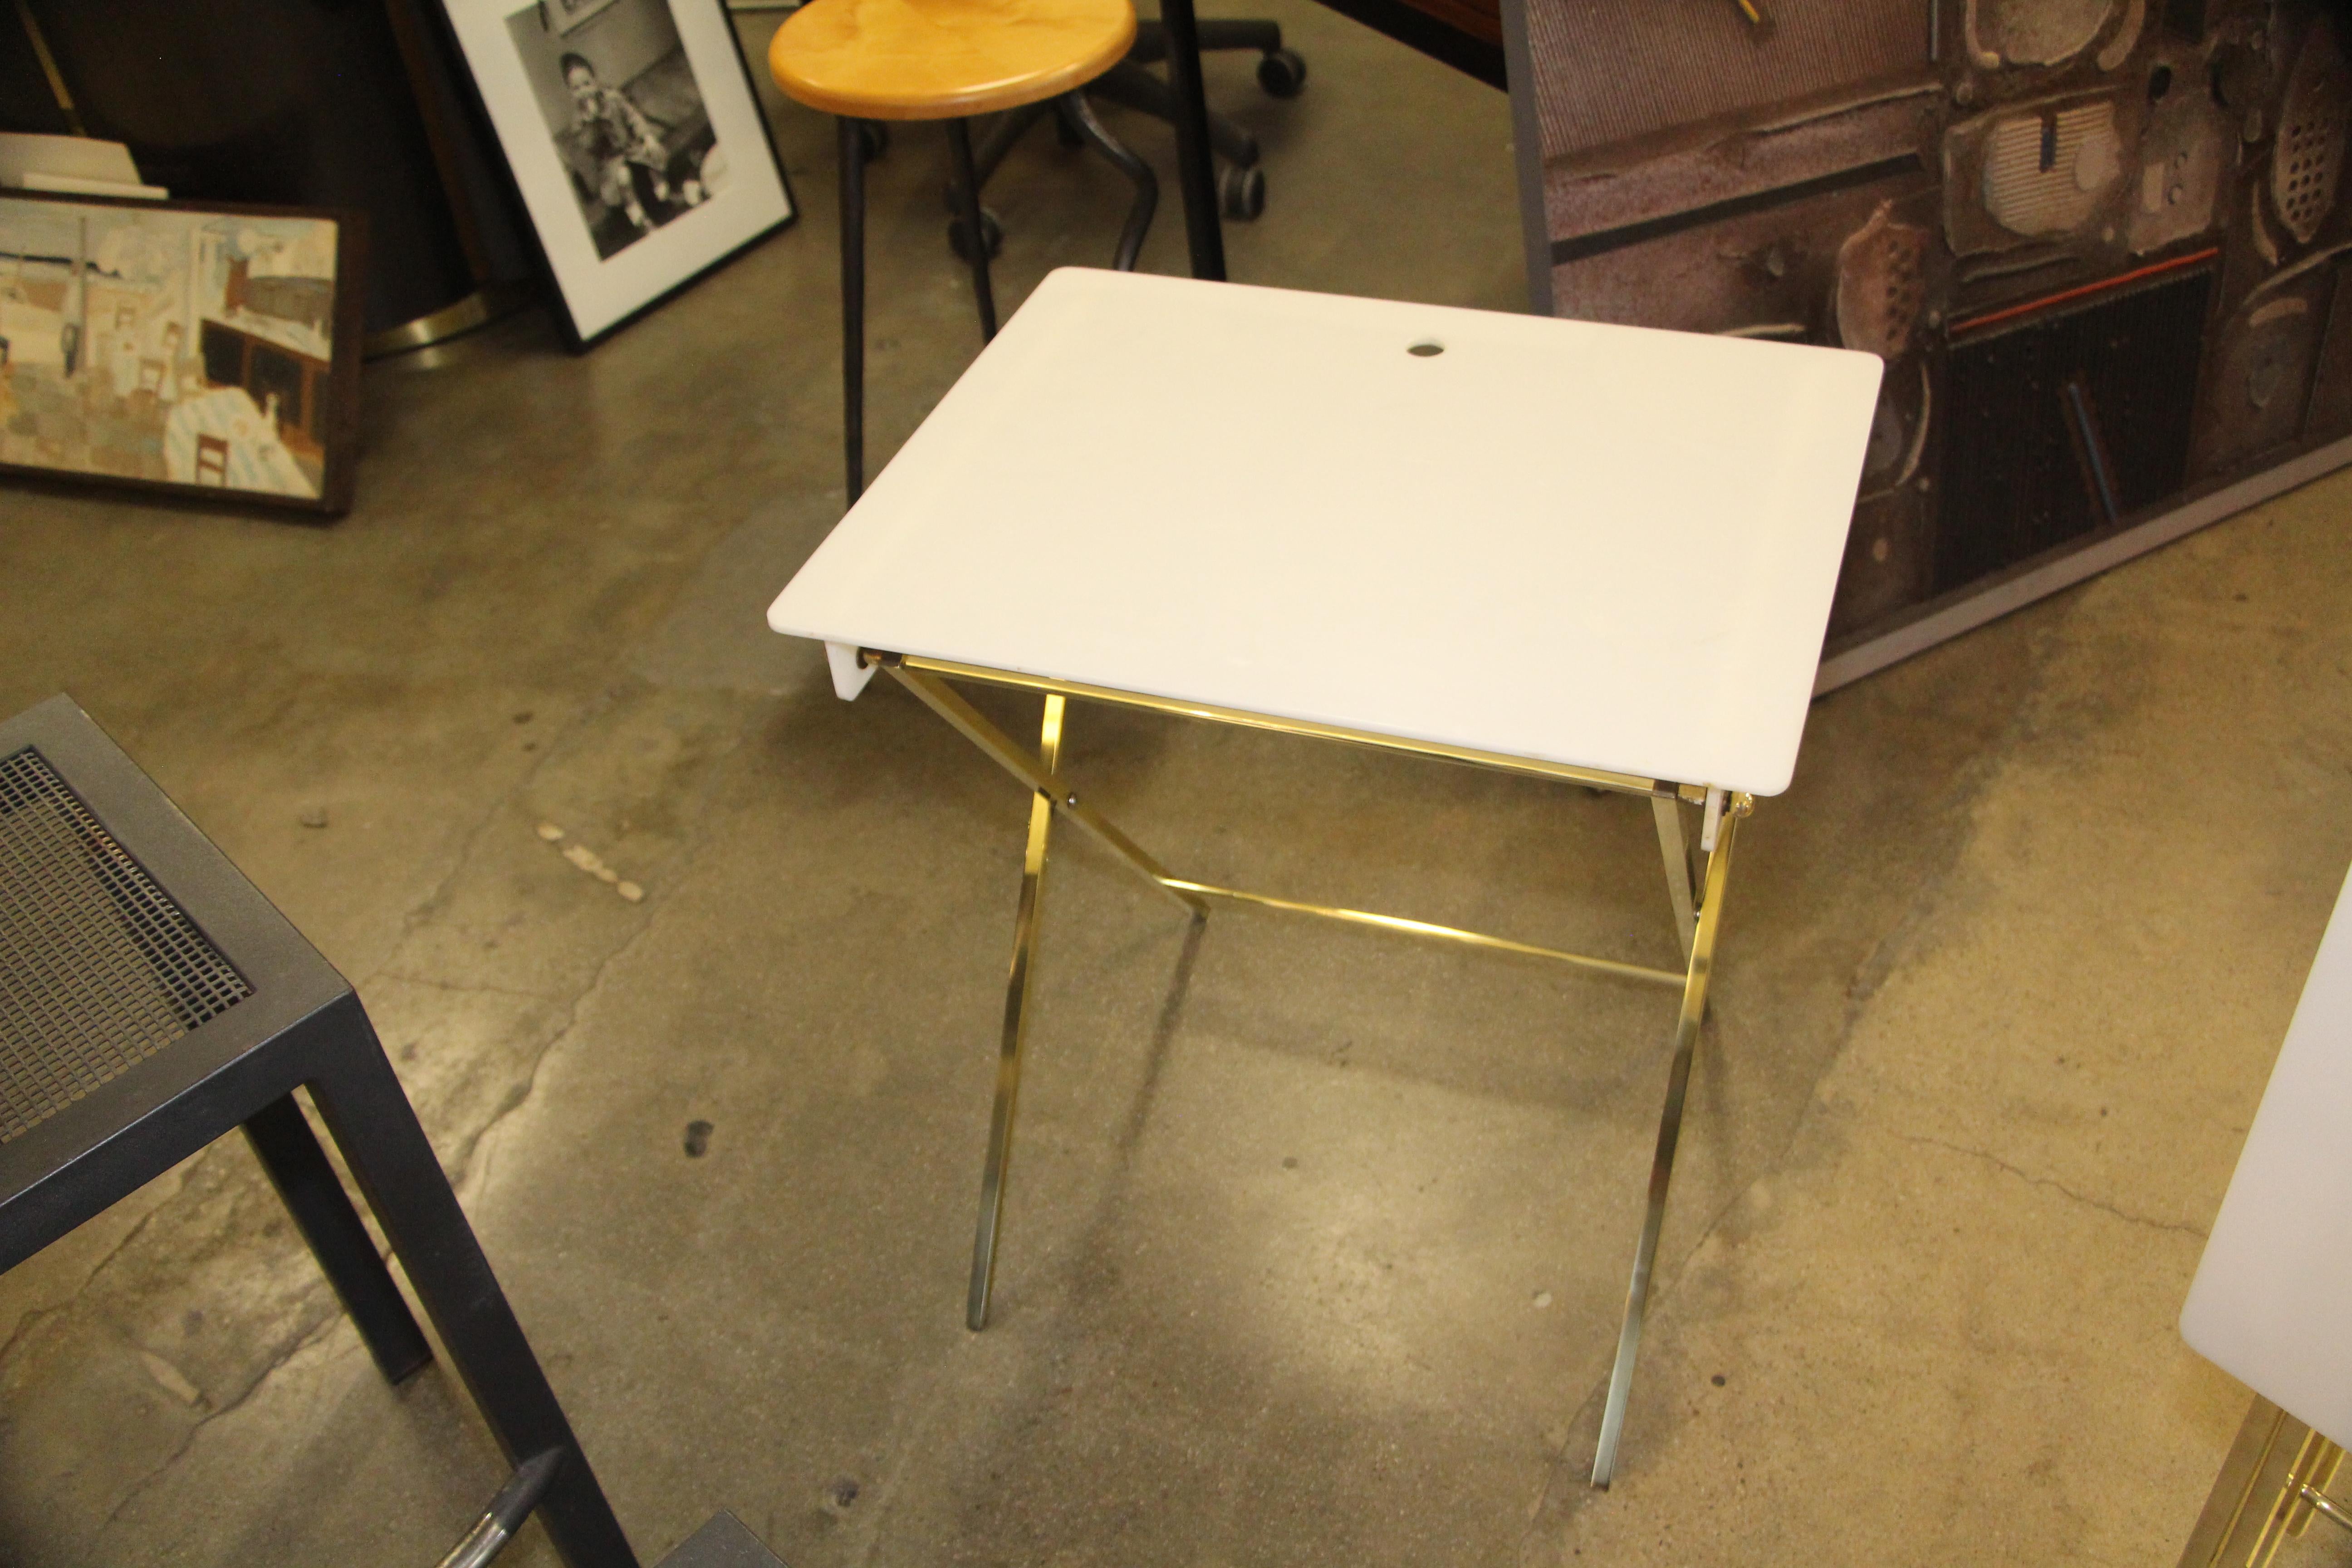 A nice early set of white acrylic and brass folding tables with a matching stand to hold them from when not in use. The acrylic base dates this group to the 1960s as Charles Hollis Jones recently pointed out when he authenticated them as his work on